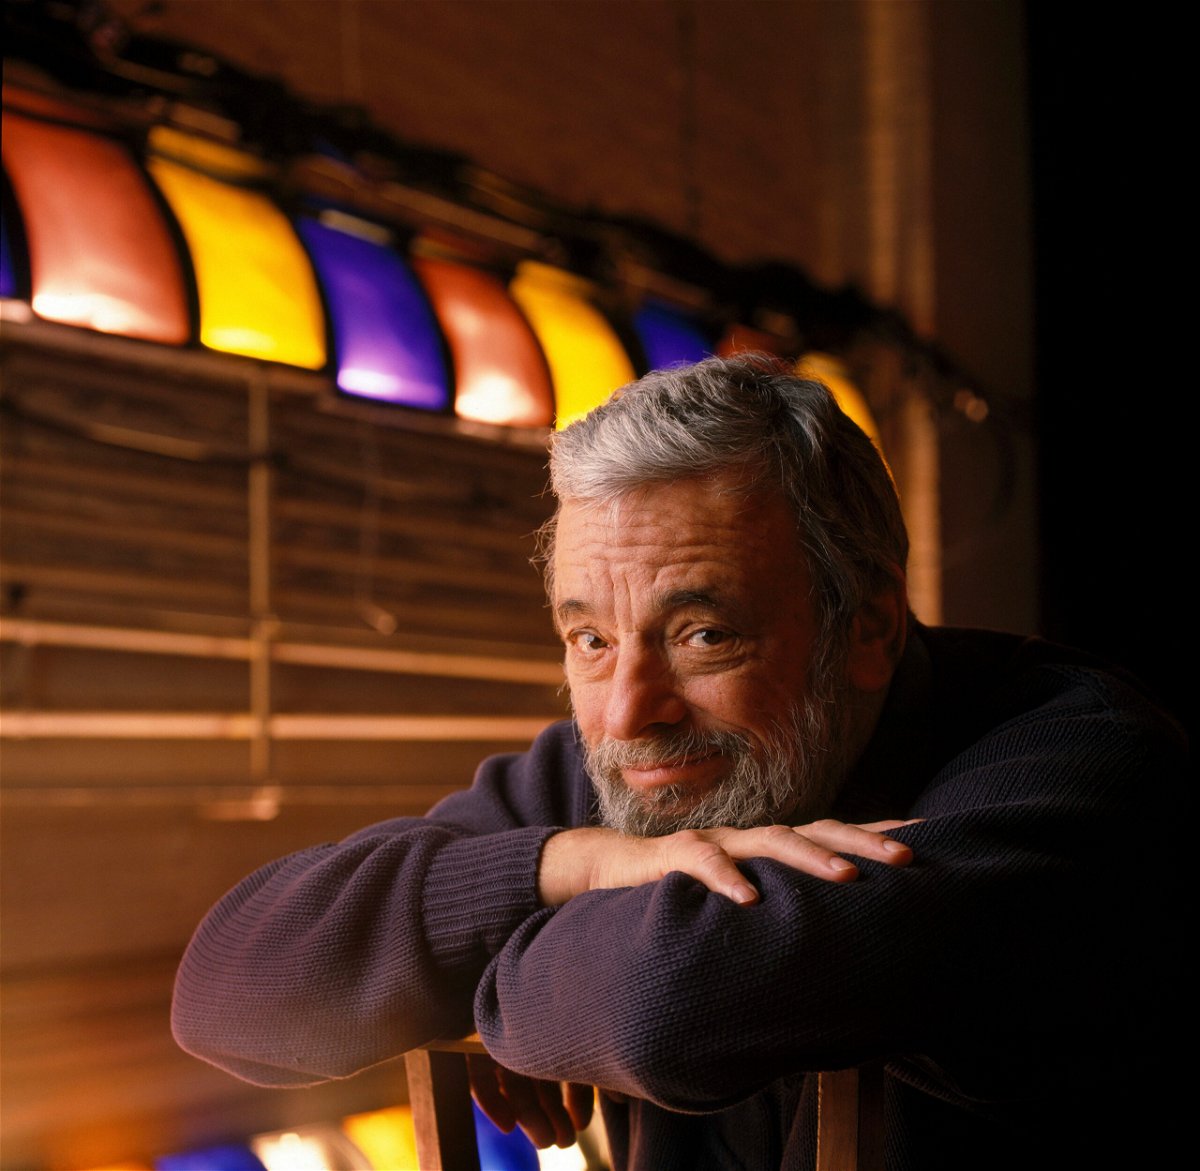 FILE -- Stephen Sondheim, the Broadway composer and lyricist, in New York, March 9, 1994. Sondheim, whose works include 